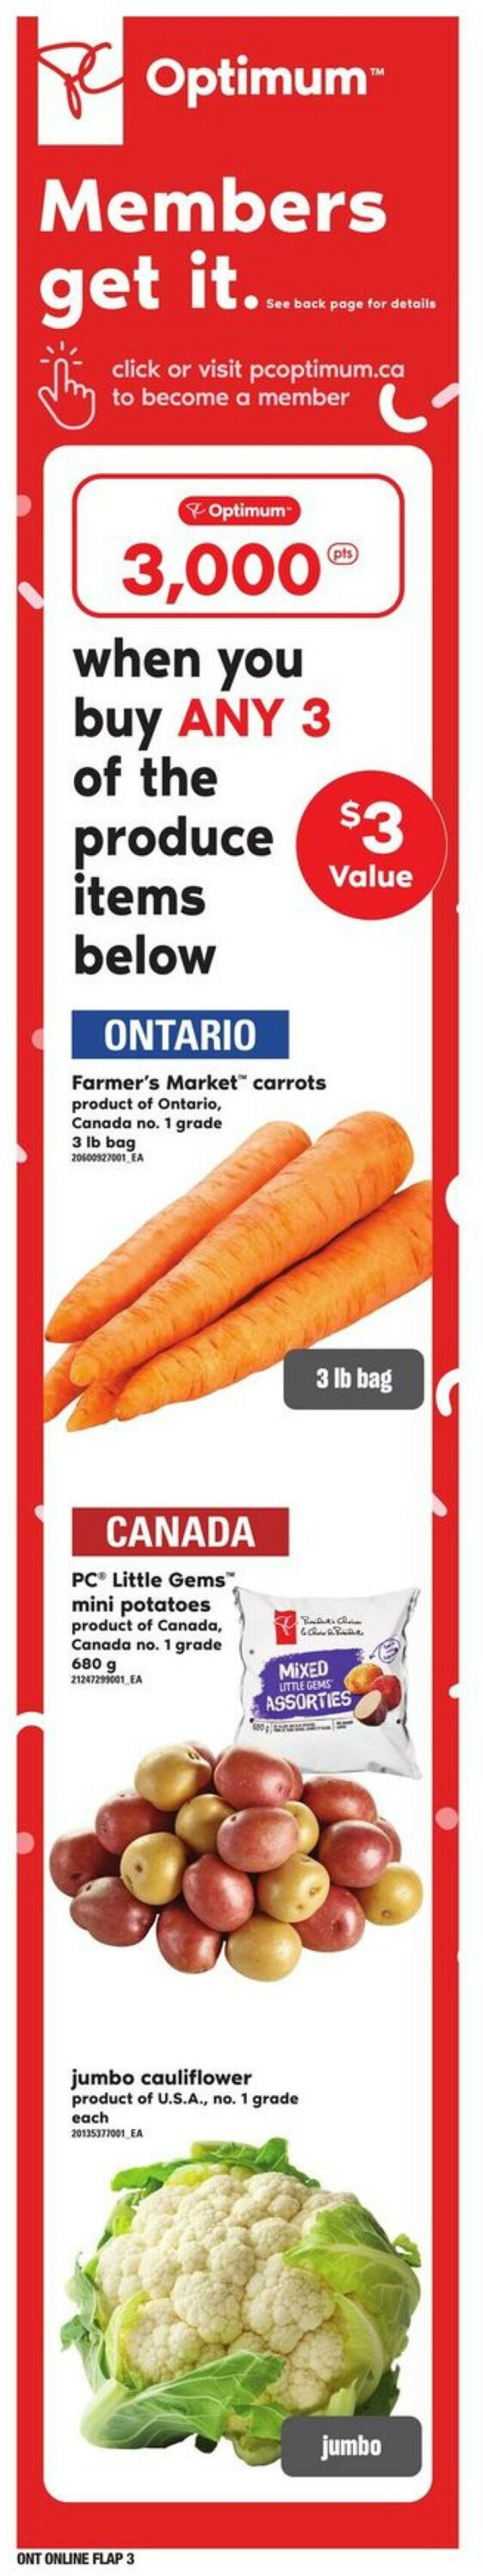 Zehrs Flyer from 11/16/2023